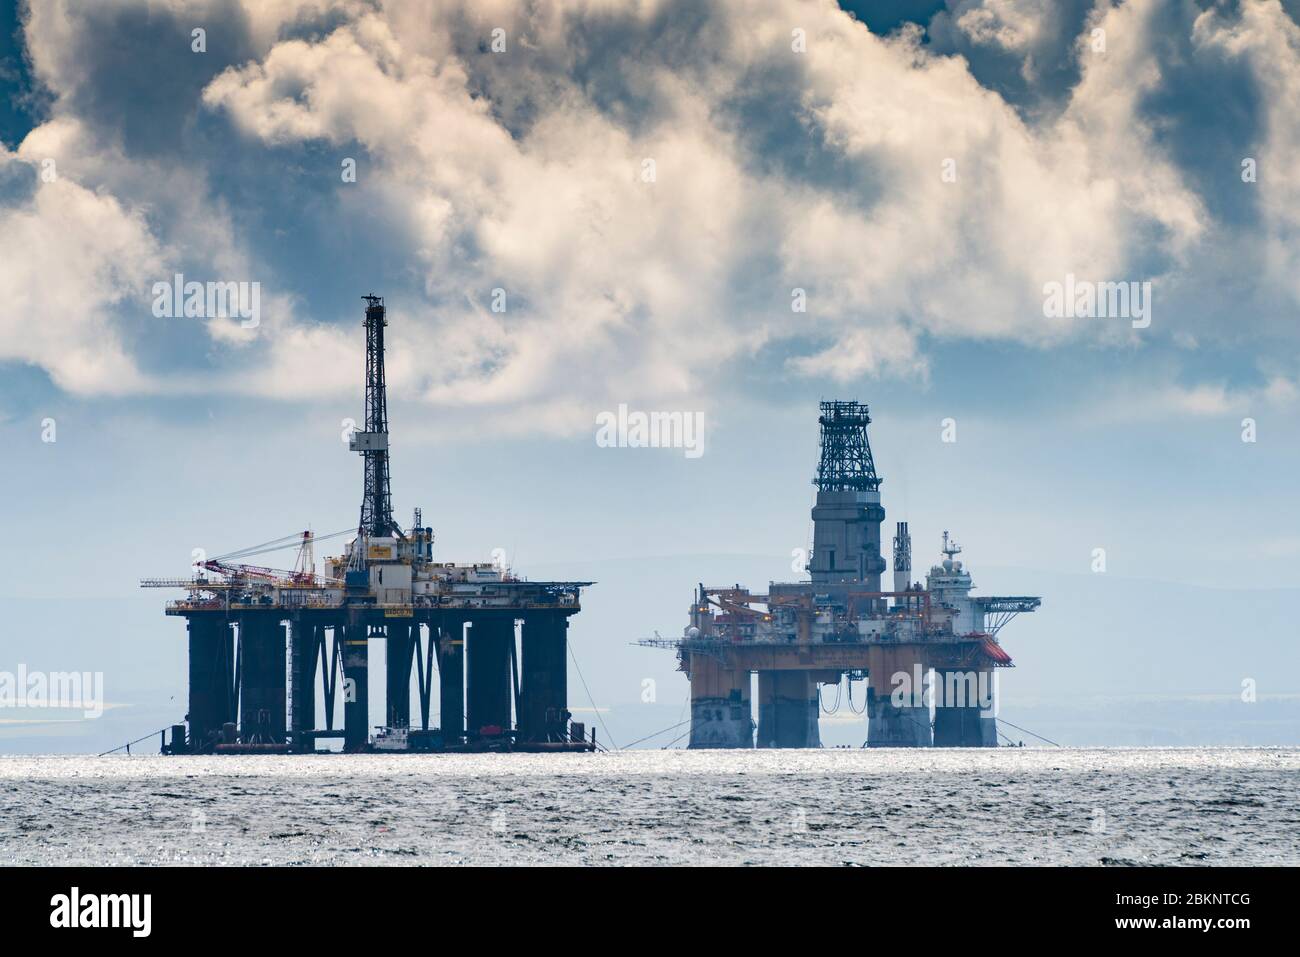 View of mothballed offshore platforms Sedco 711 (left ) and Deepsea Aberdeen moored in Firth of Forth river , Scotland, UK Stock Photo